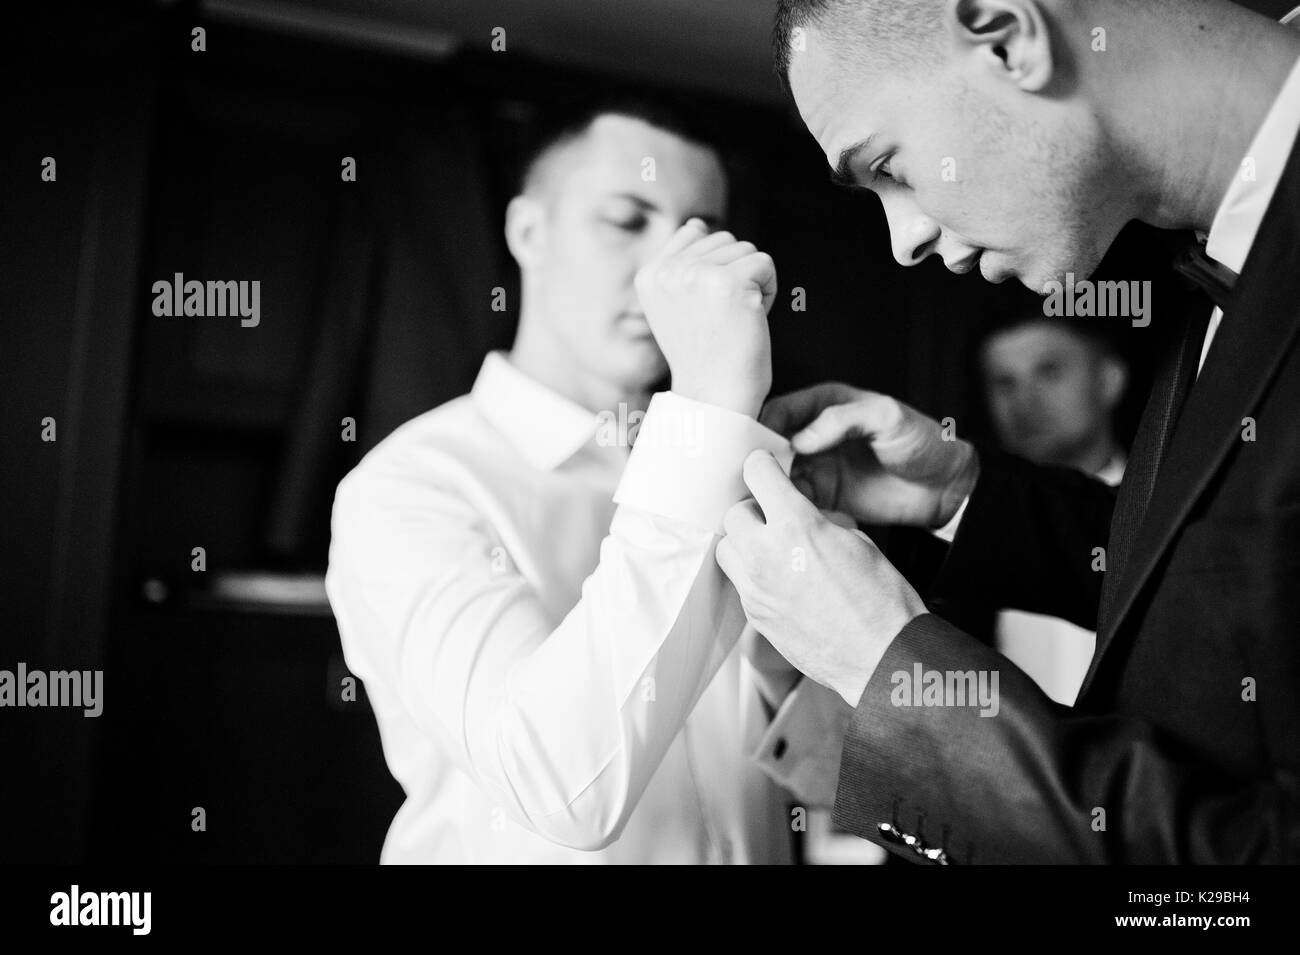 Groomsmen helping groom to dress up and get ready for his wedding ceremony. Black and white photo. Stock Photo